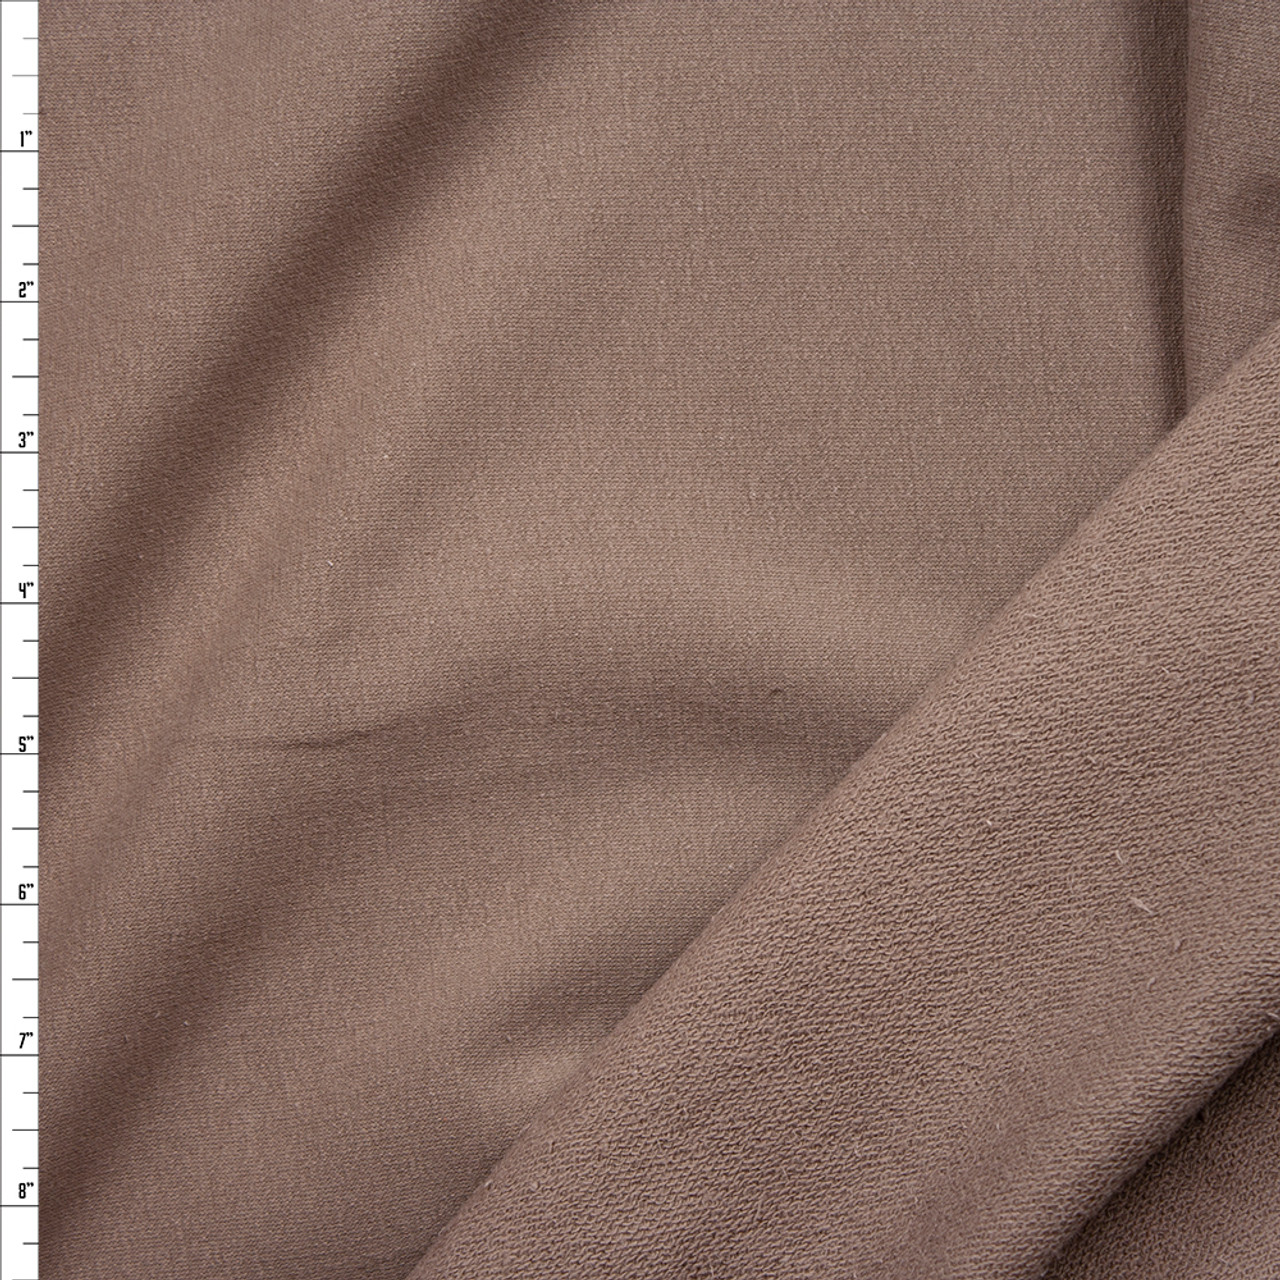 Cali Fabrics Taupe Stretch Cotton French Terry Fabric by the Yard